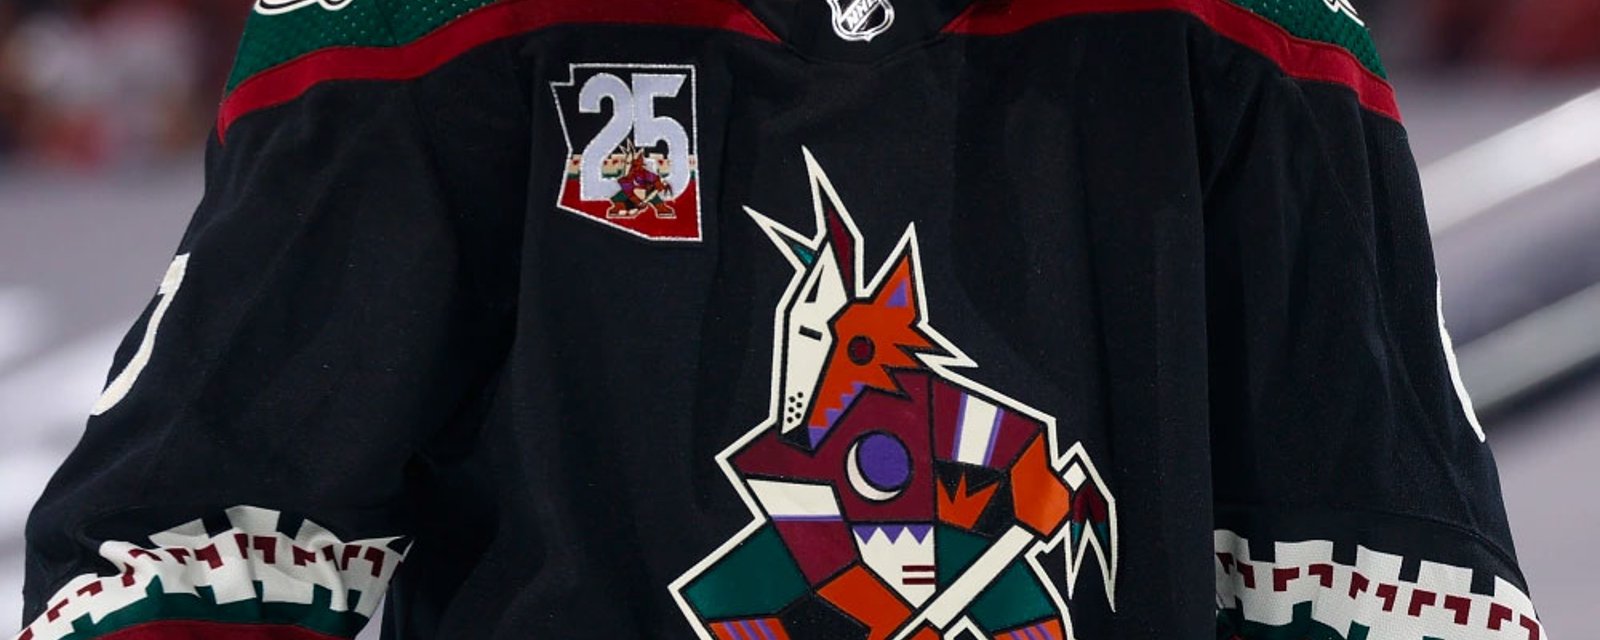 Forbes reports the Arizona Coyotes are being relocated, but not to Quebec City